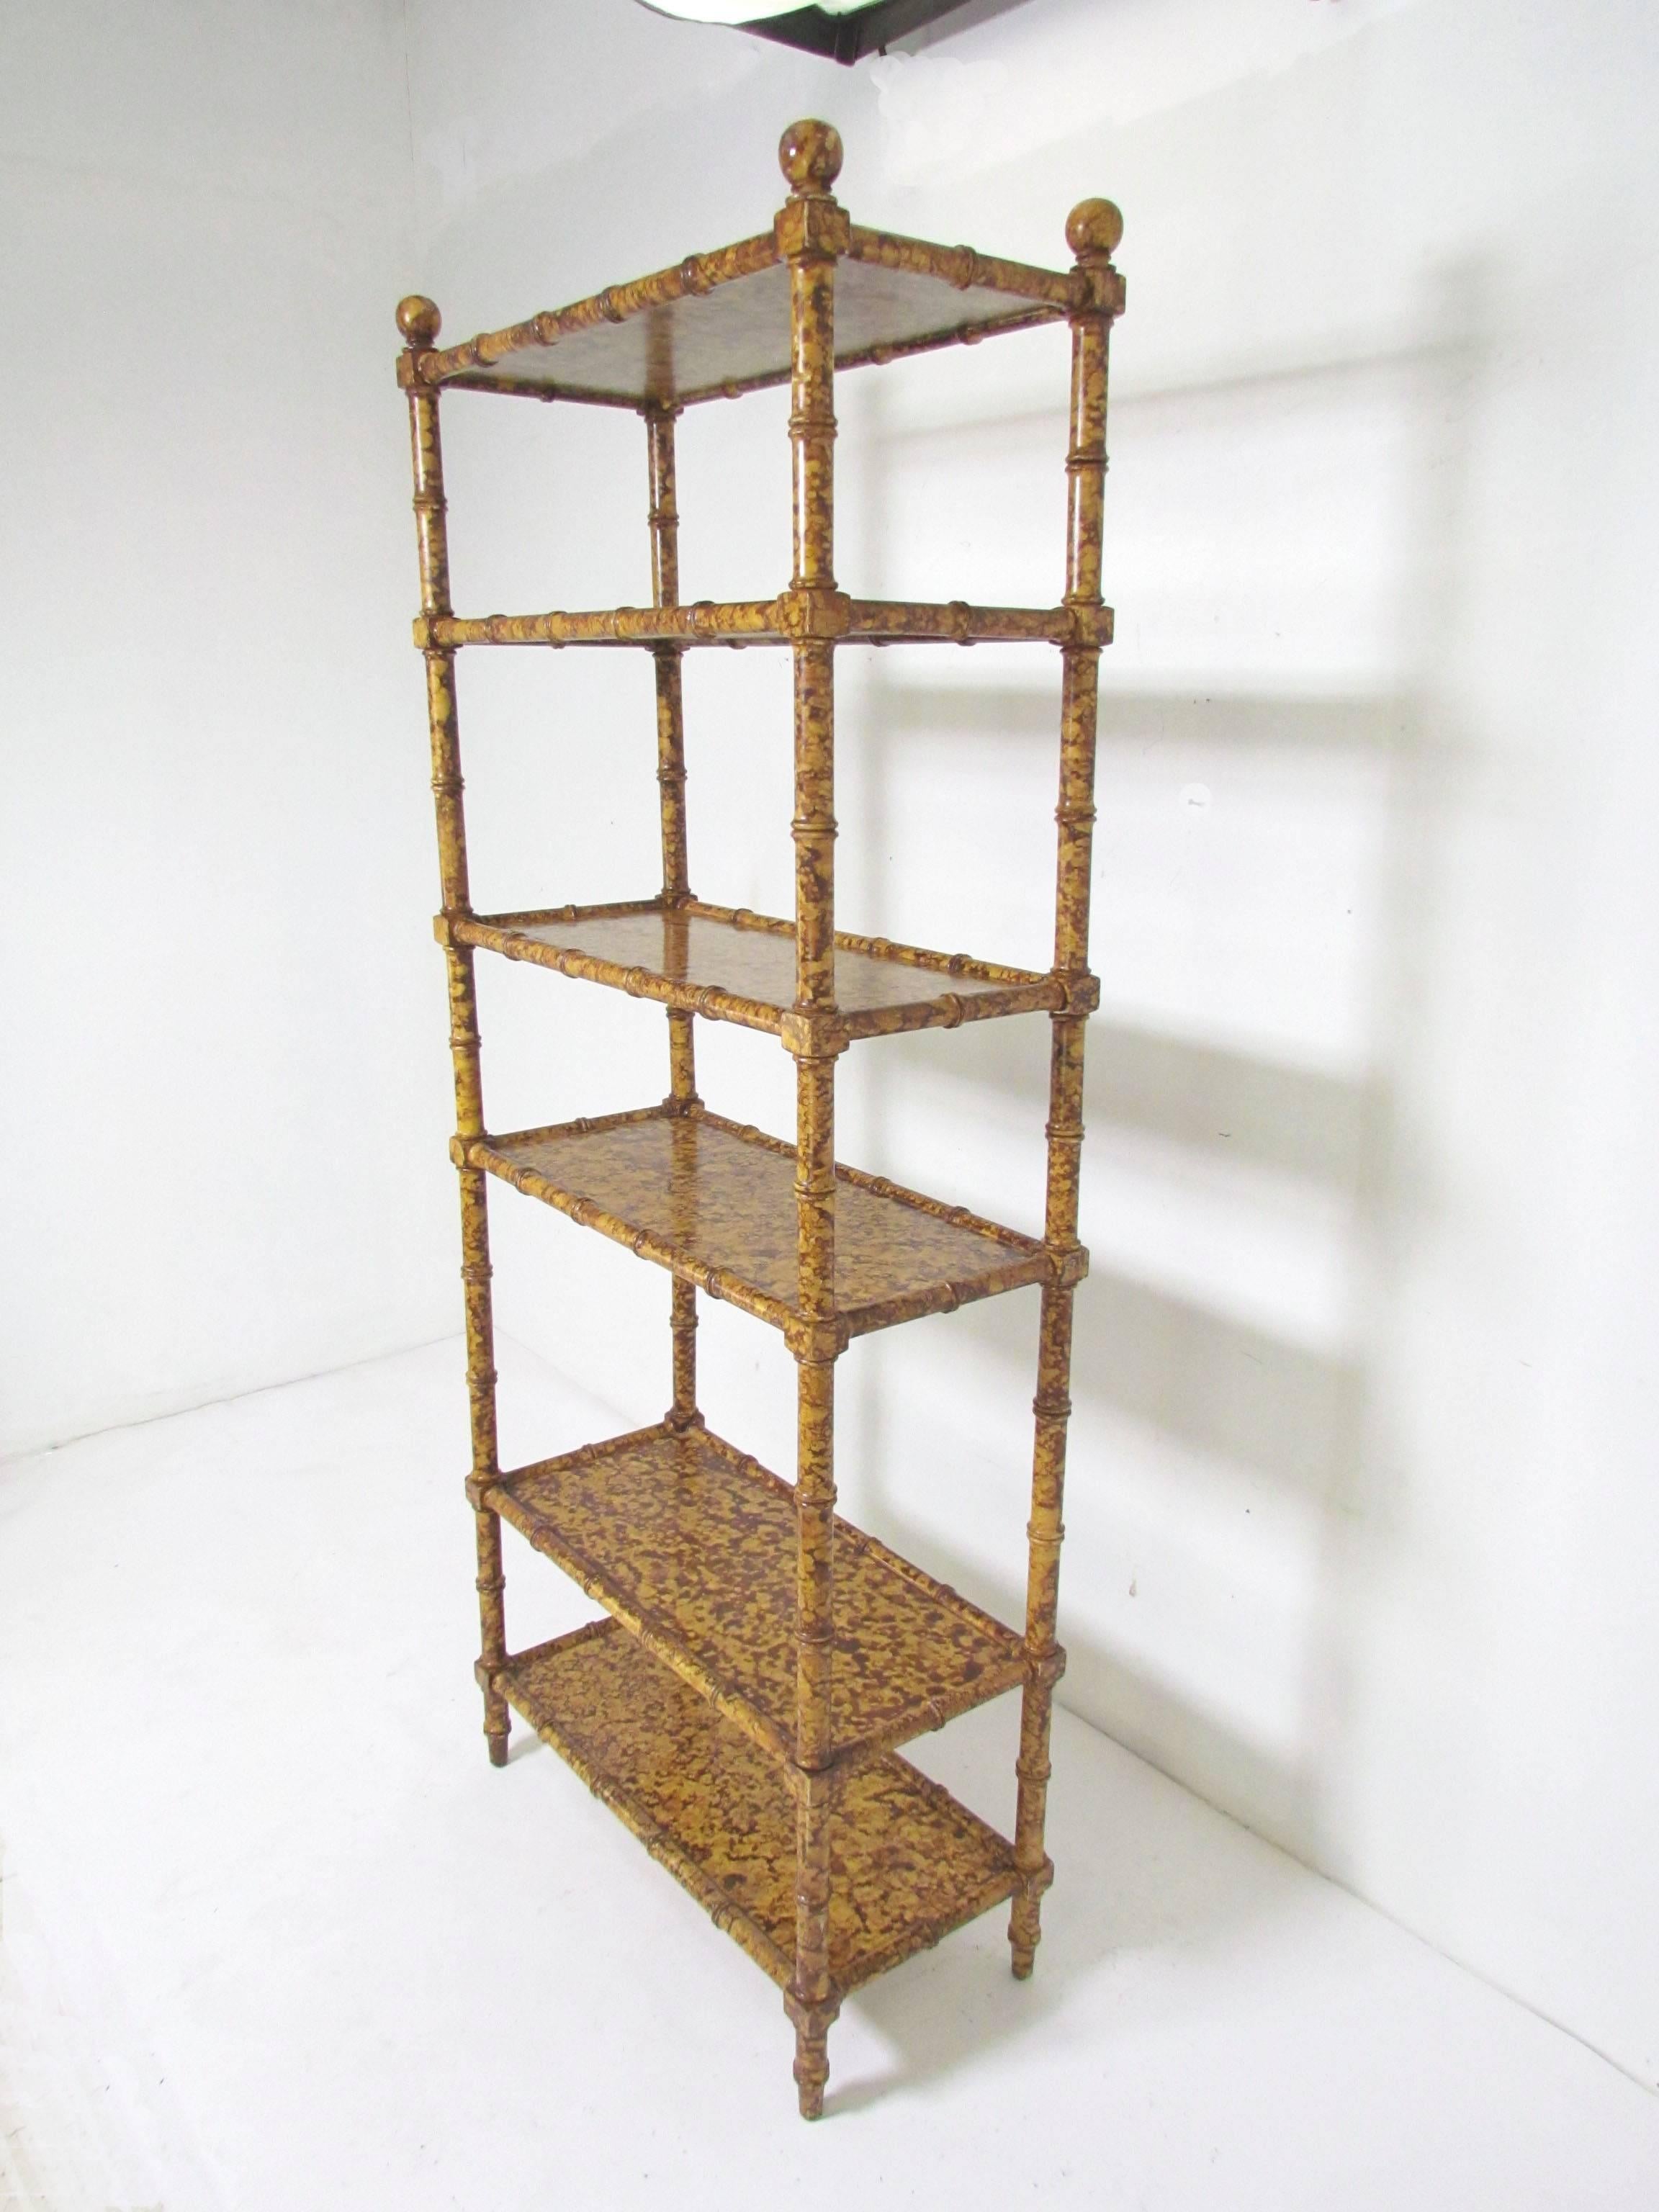 Display shelf Etagere in faux bamboo with a tortoise shell finish, circa 1970s.